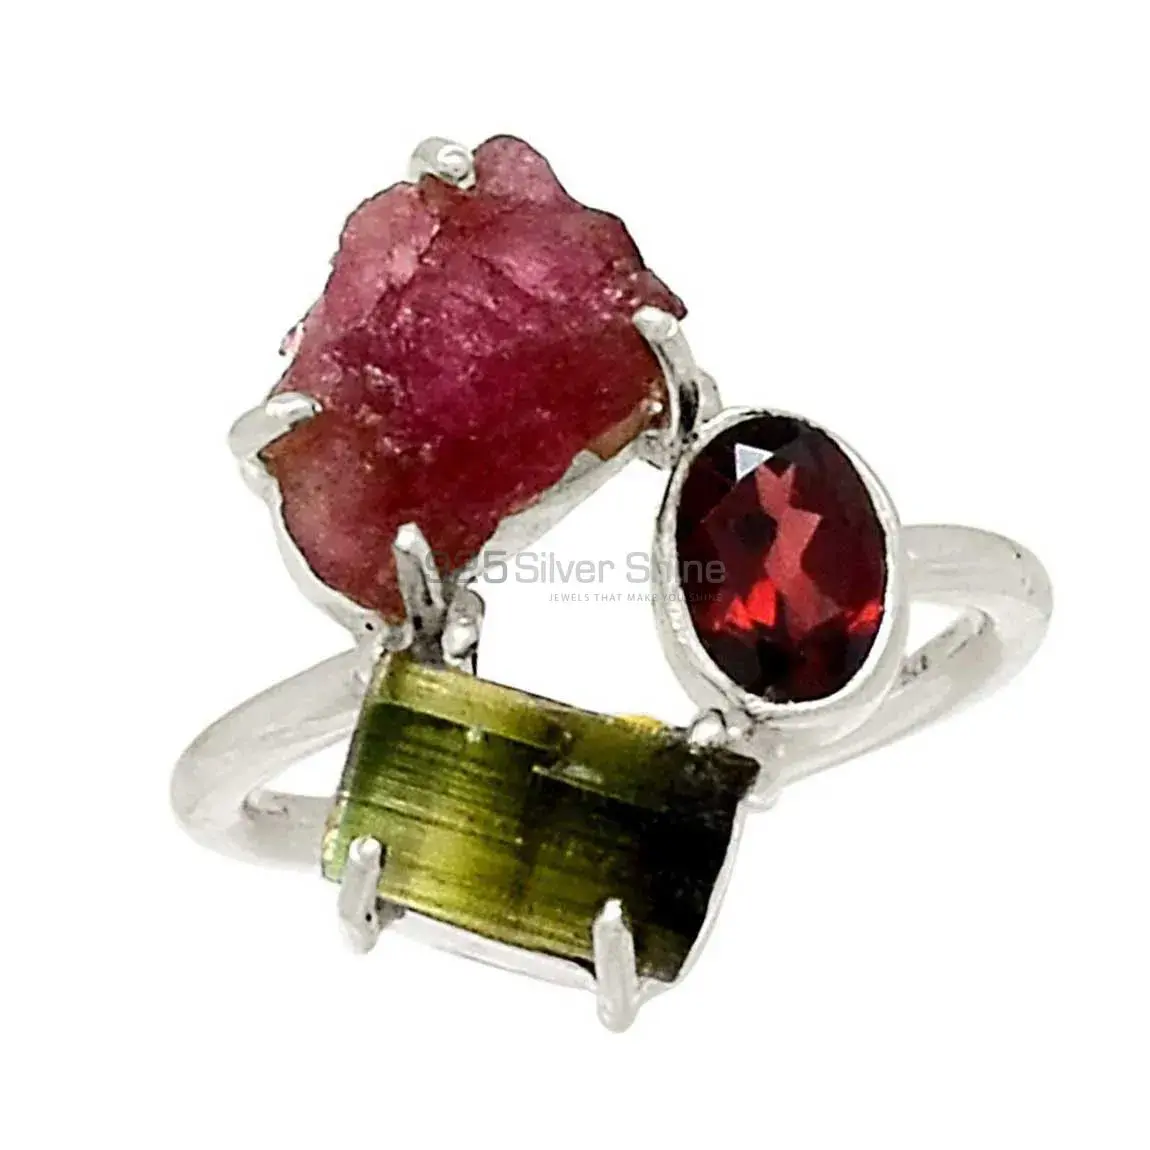 Top Quality Silver Rings In Genuine Stone Jewelry 925SR2248